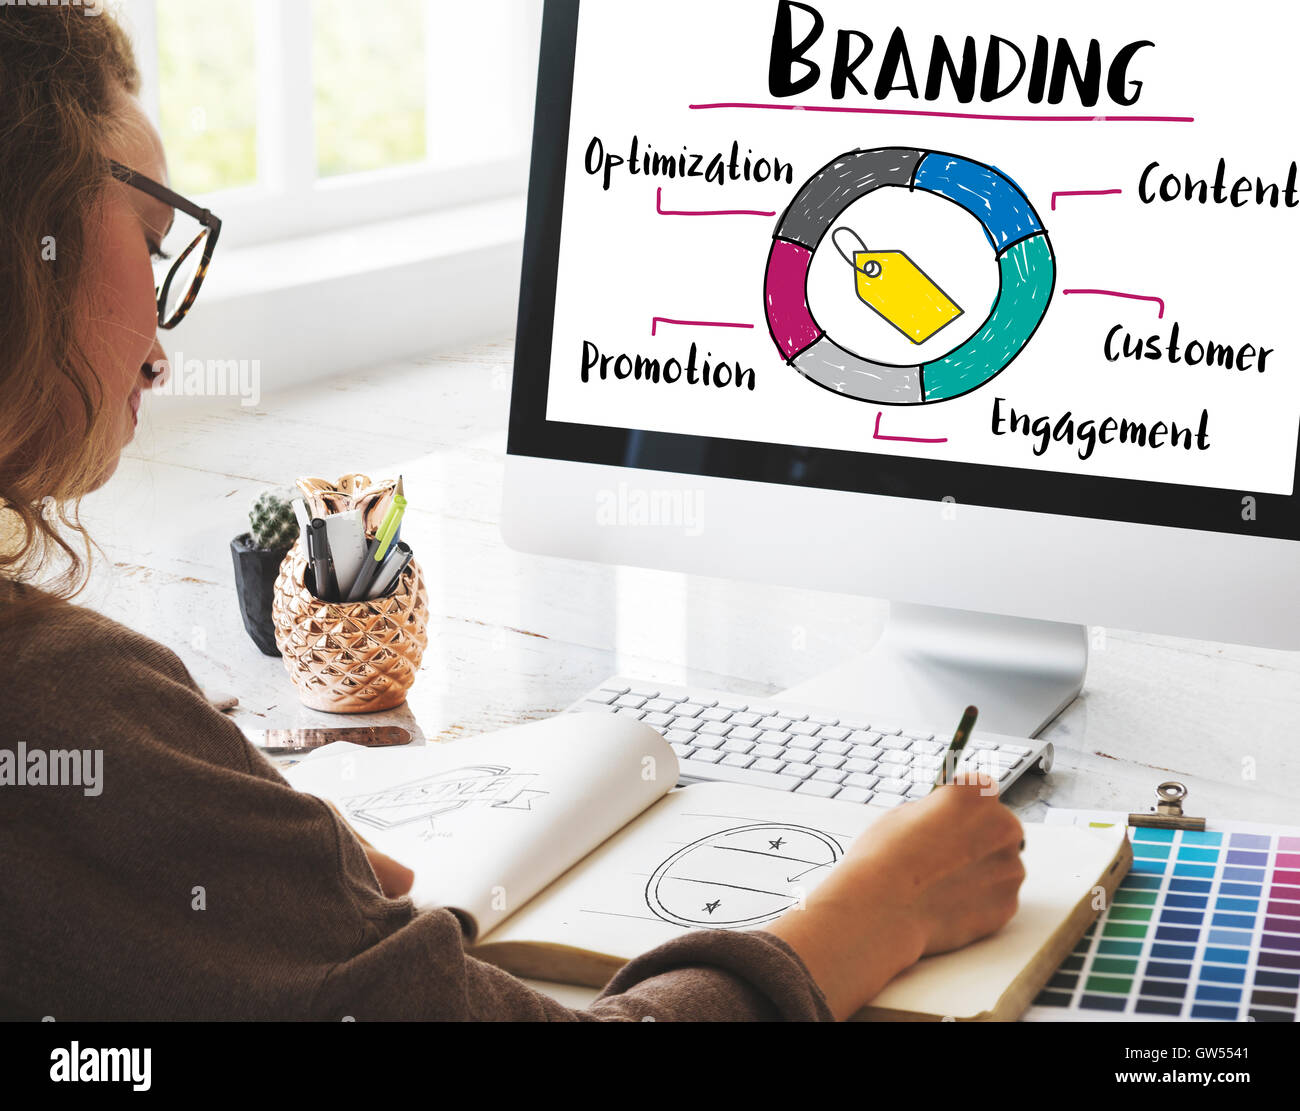 Branding Promotion Commercial Marketing Advertising Concept Stock Photo